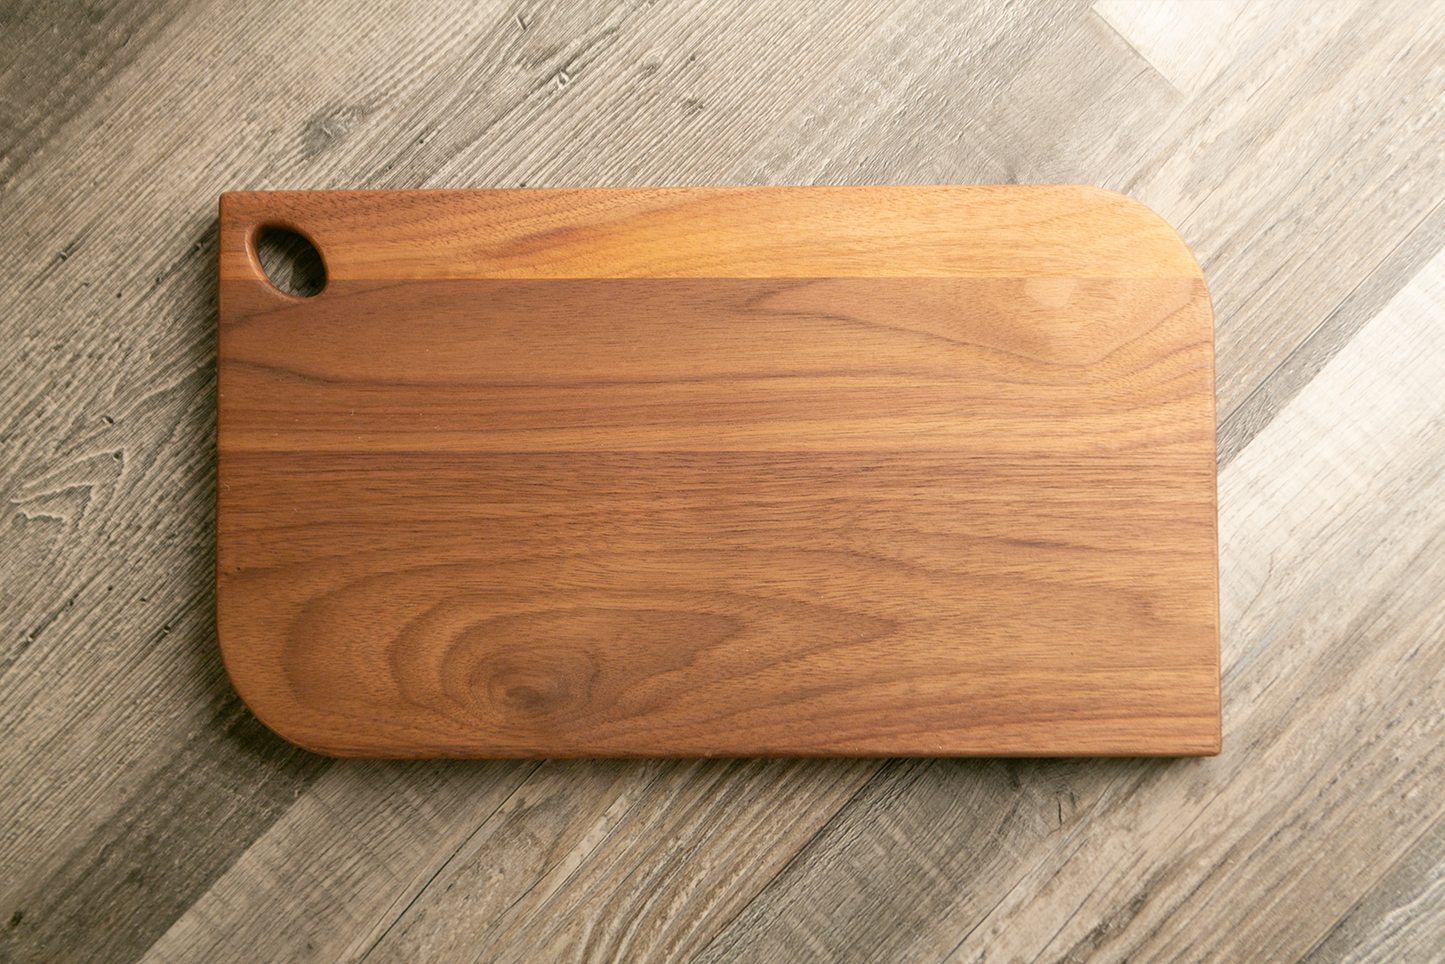 Walnut Charcuterie / Serving Board - 8"x14" with Cutout